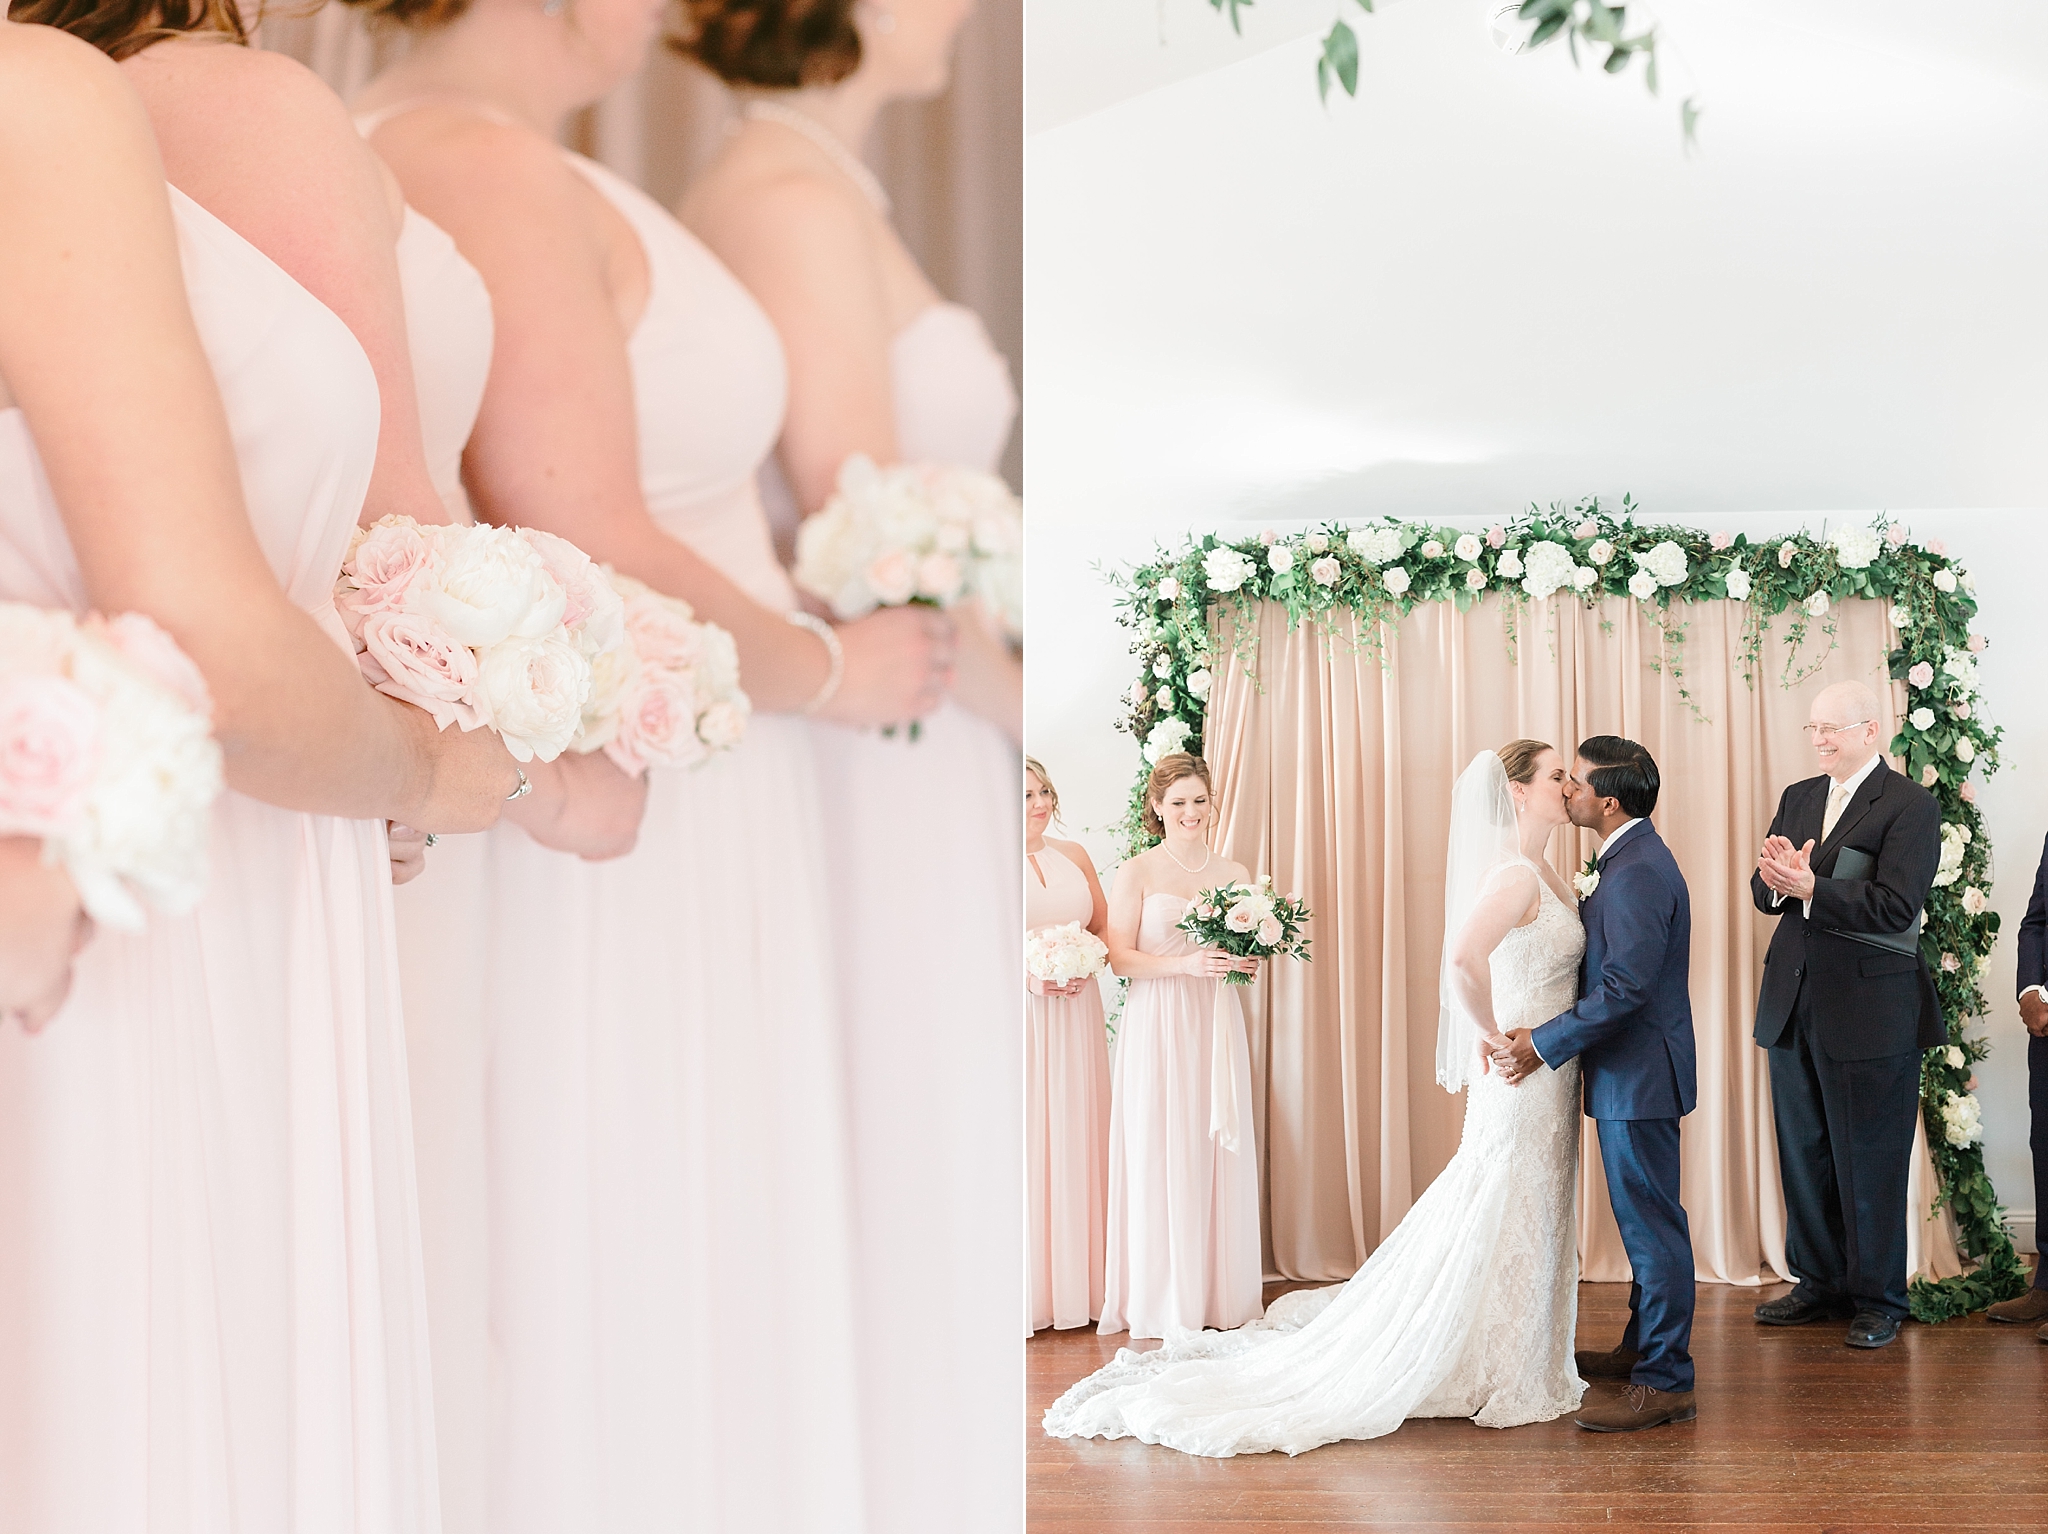 This romantic English garden wedding at Antrim 1844 in Taneytown, MD was planned by Eastmade Events and photographed by DC photographer, Alicia Lacey.  